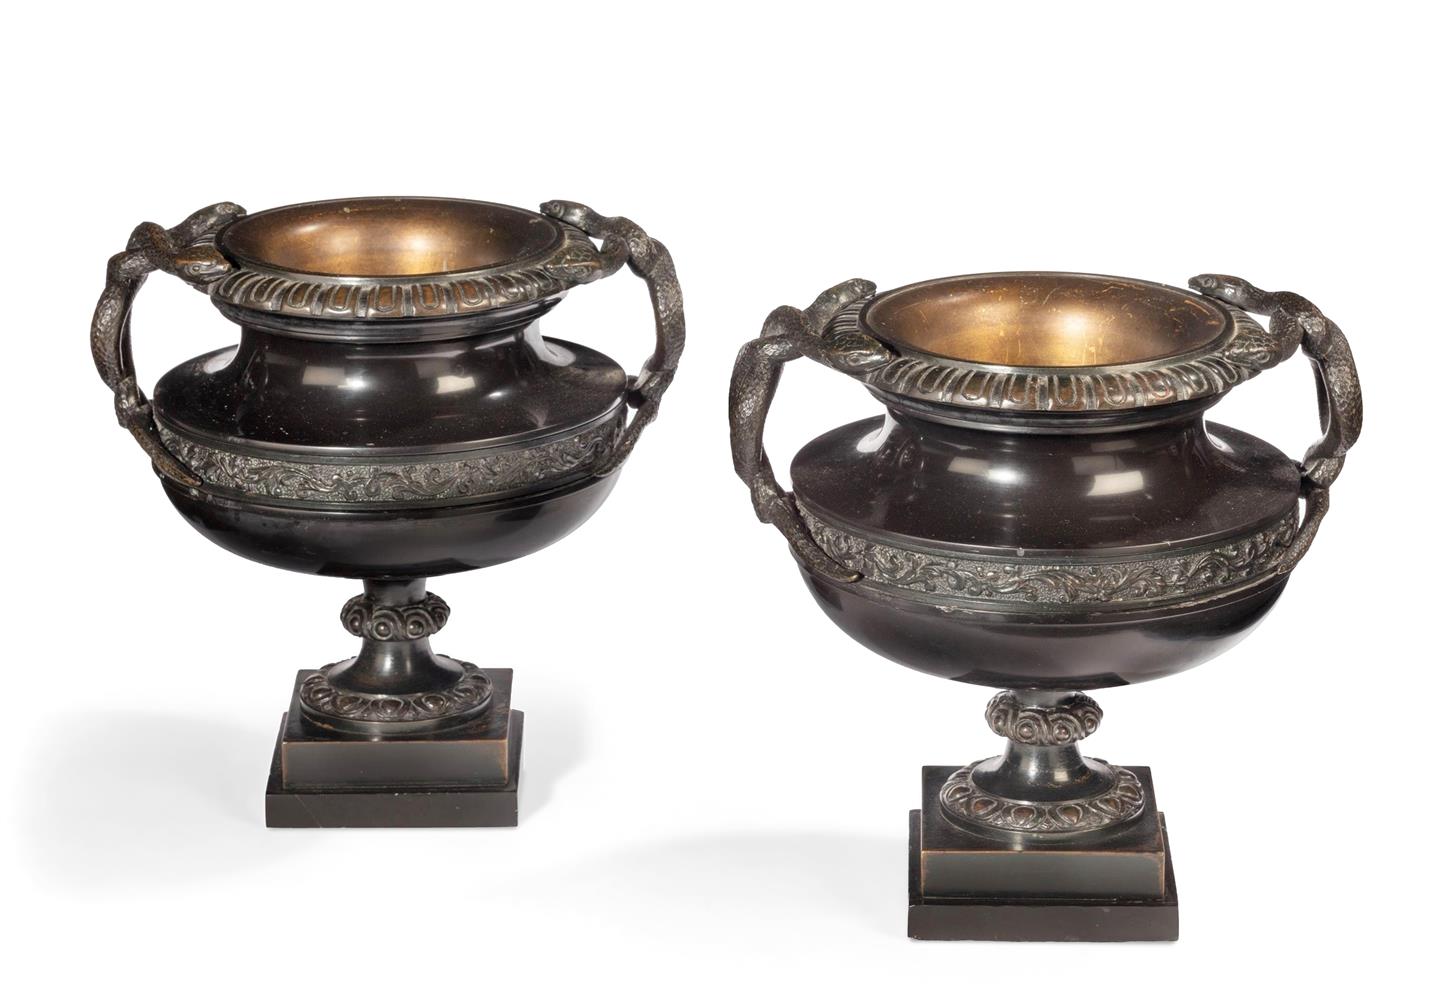 A PAIR OF BRONZE NEOCLASSIC TWIN HANDLED PEDESTAL URNS 19TH CENTURY - Image 2 of 6